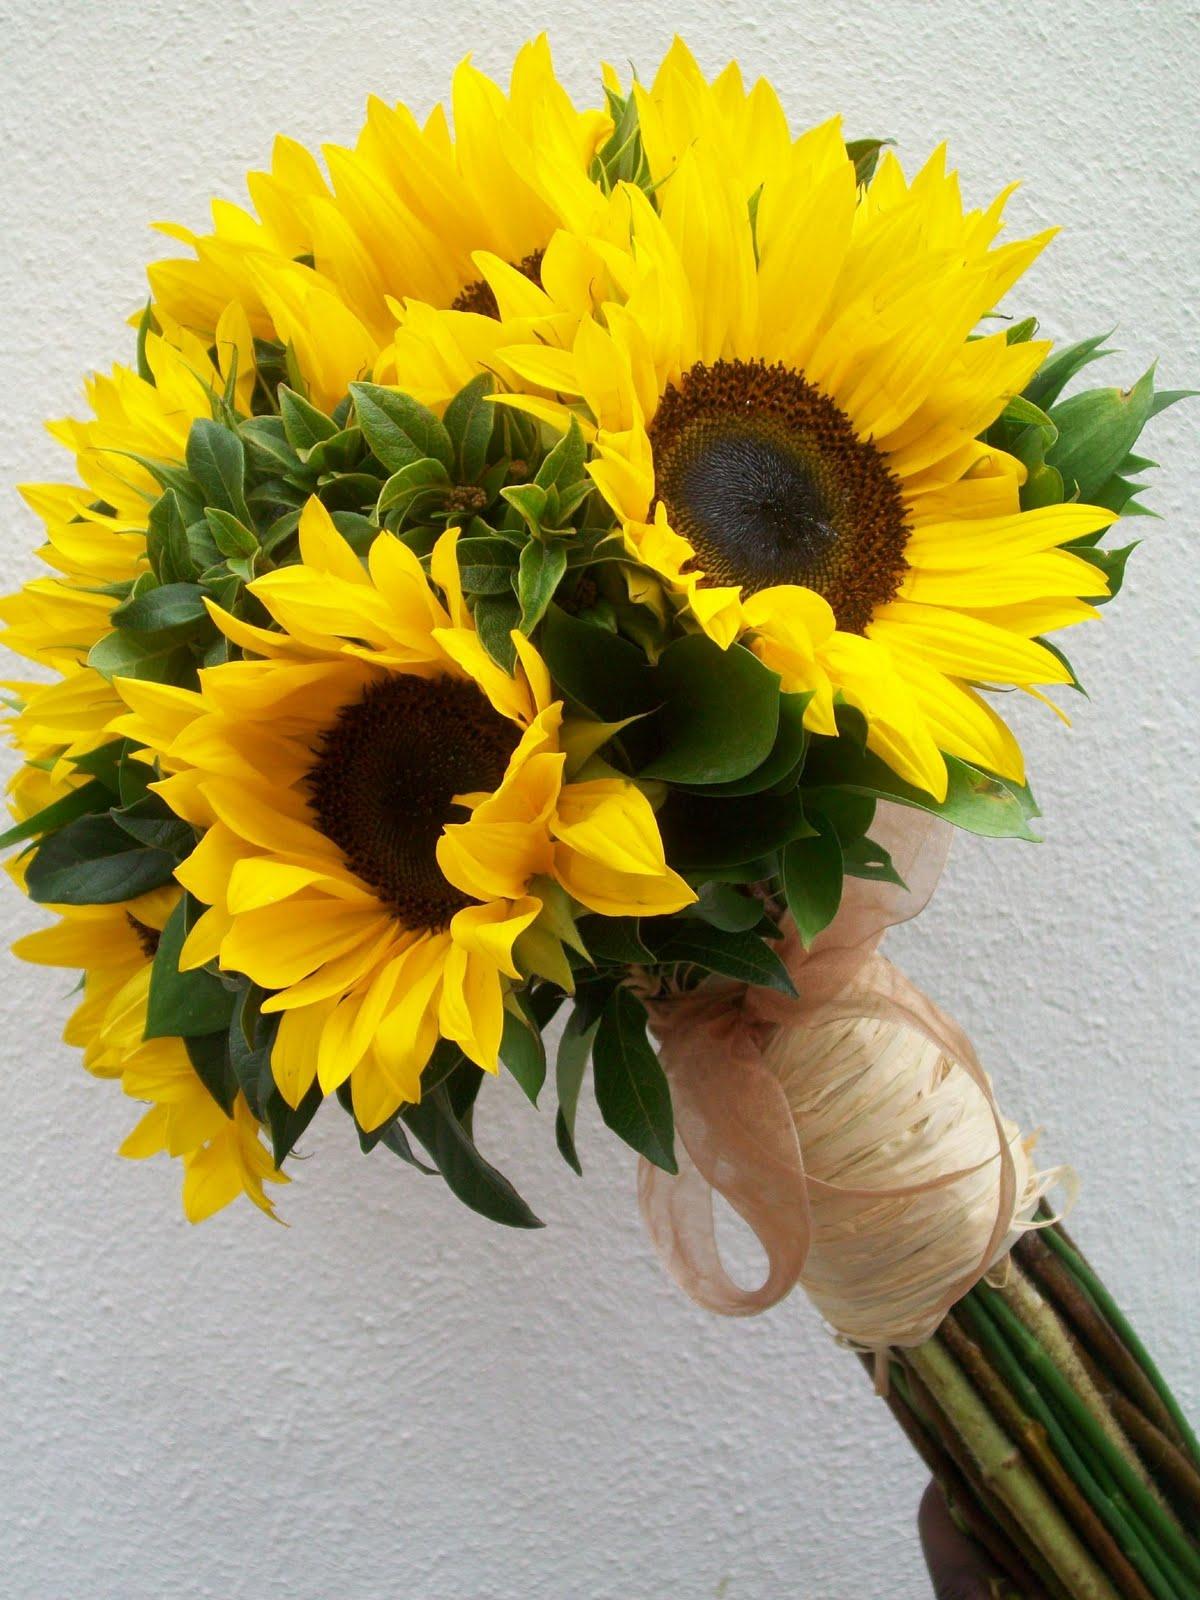 sunflowers is the first thing that came to mind! You can add satin ribbon to